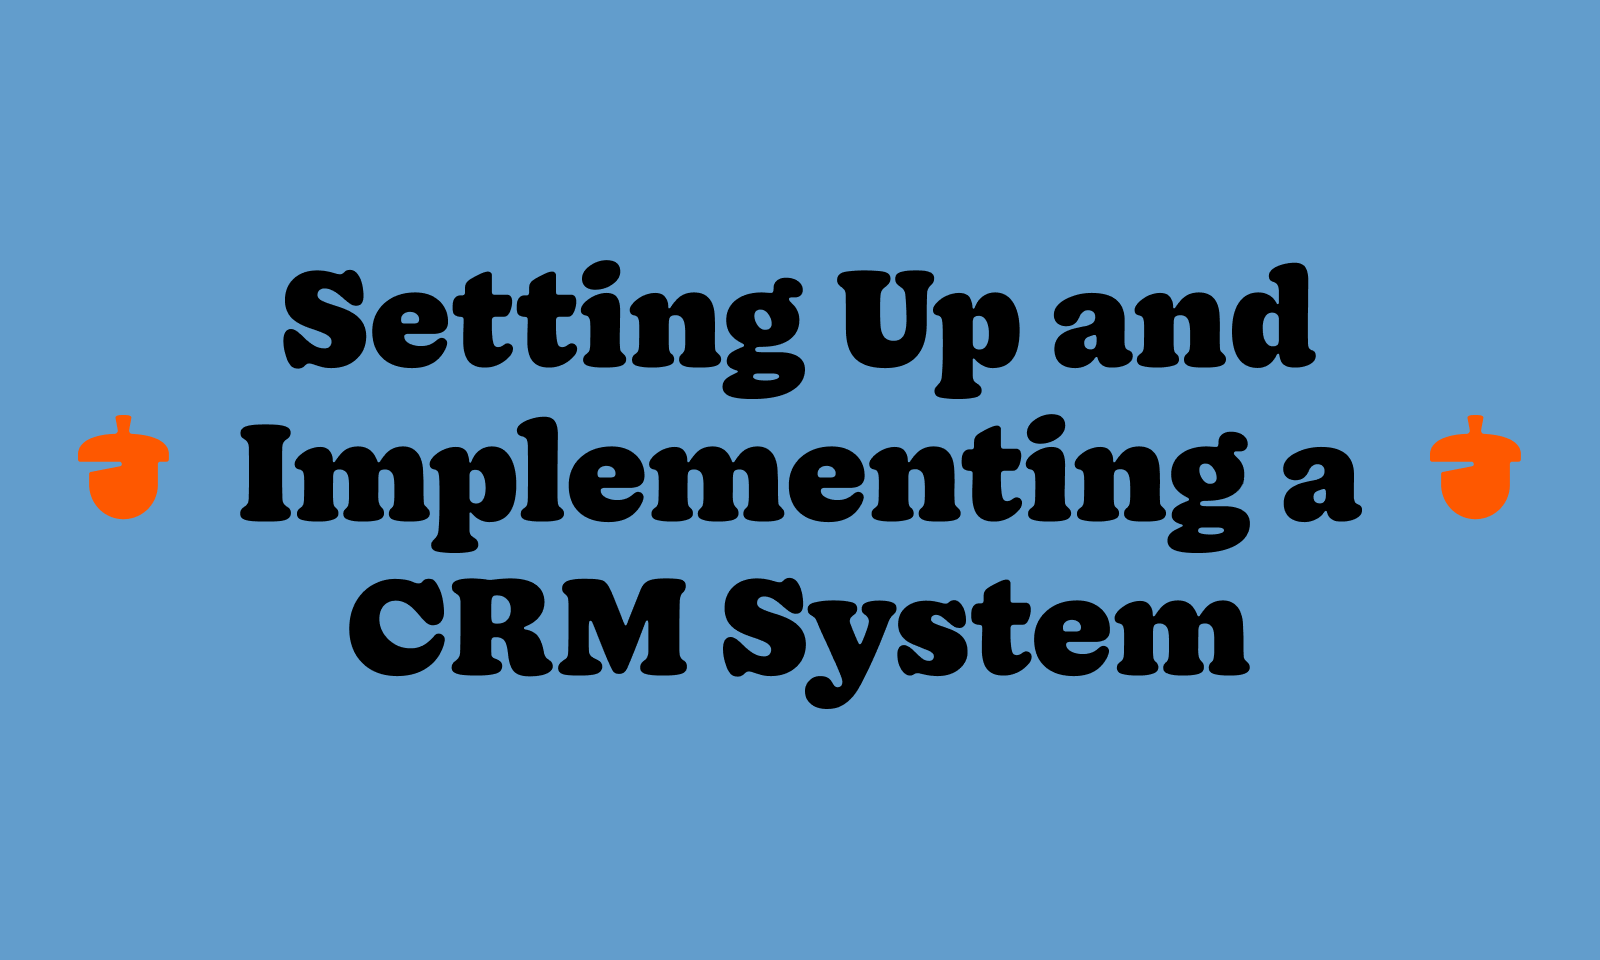 Setting up and implementing a CRM system